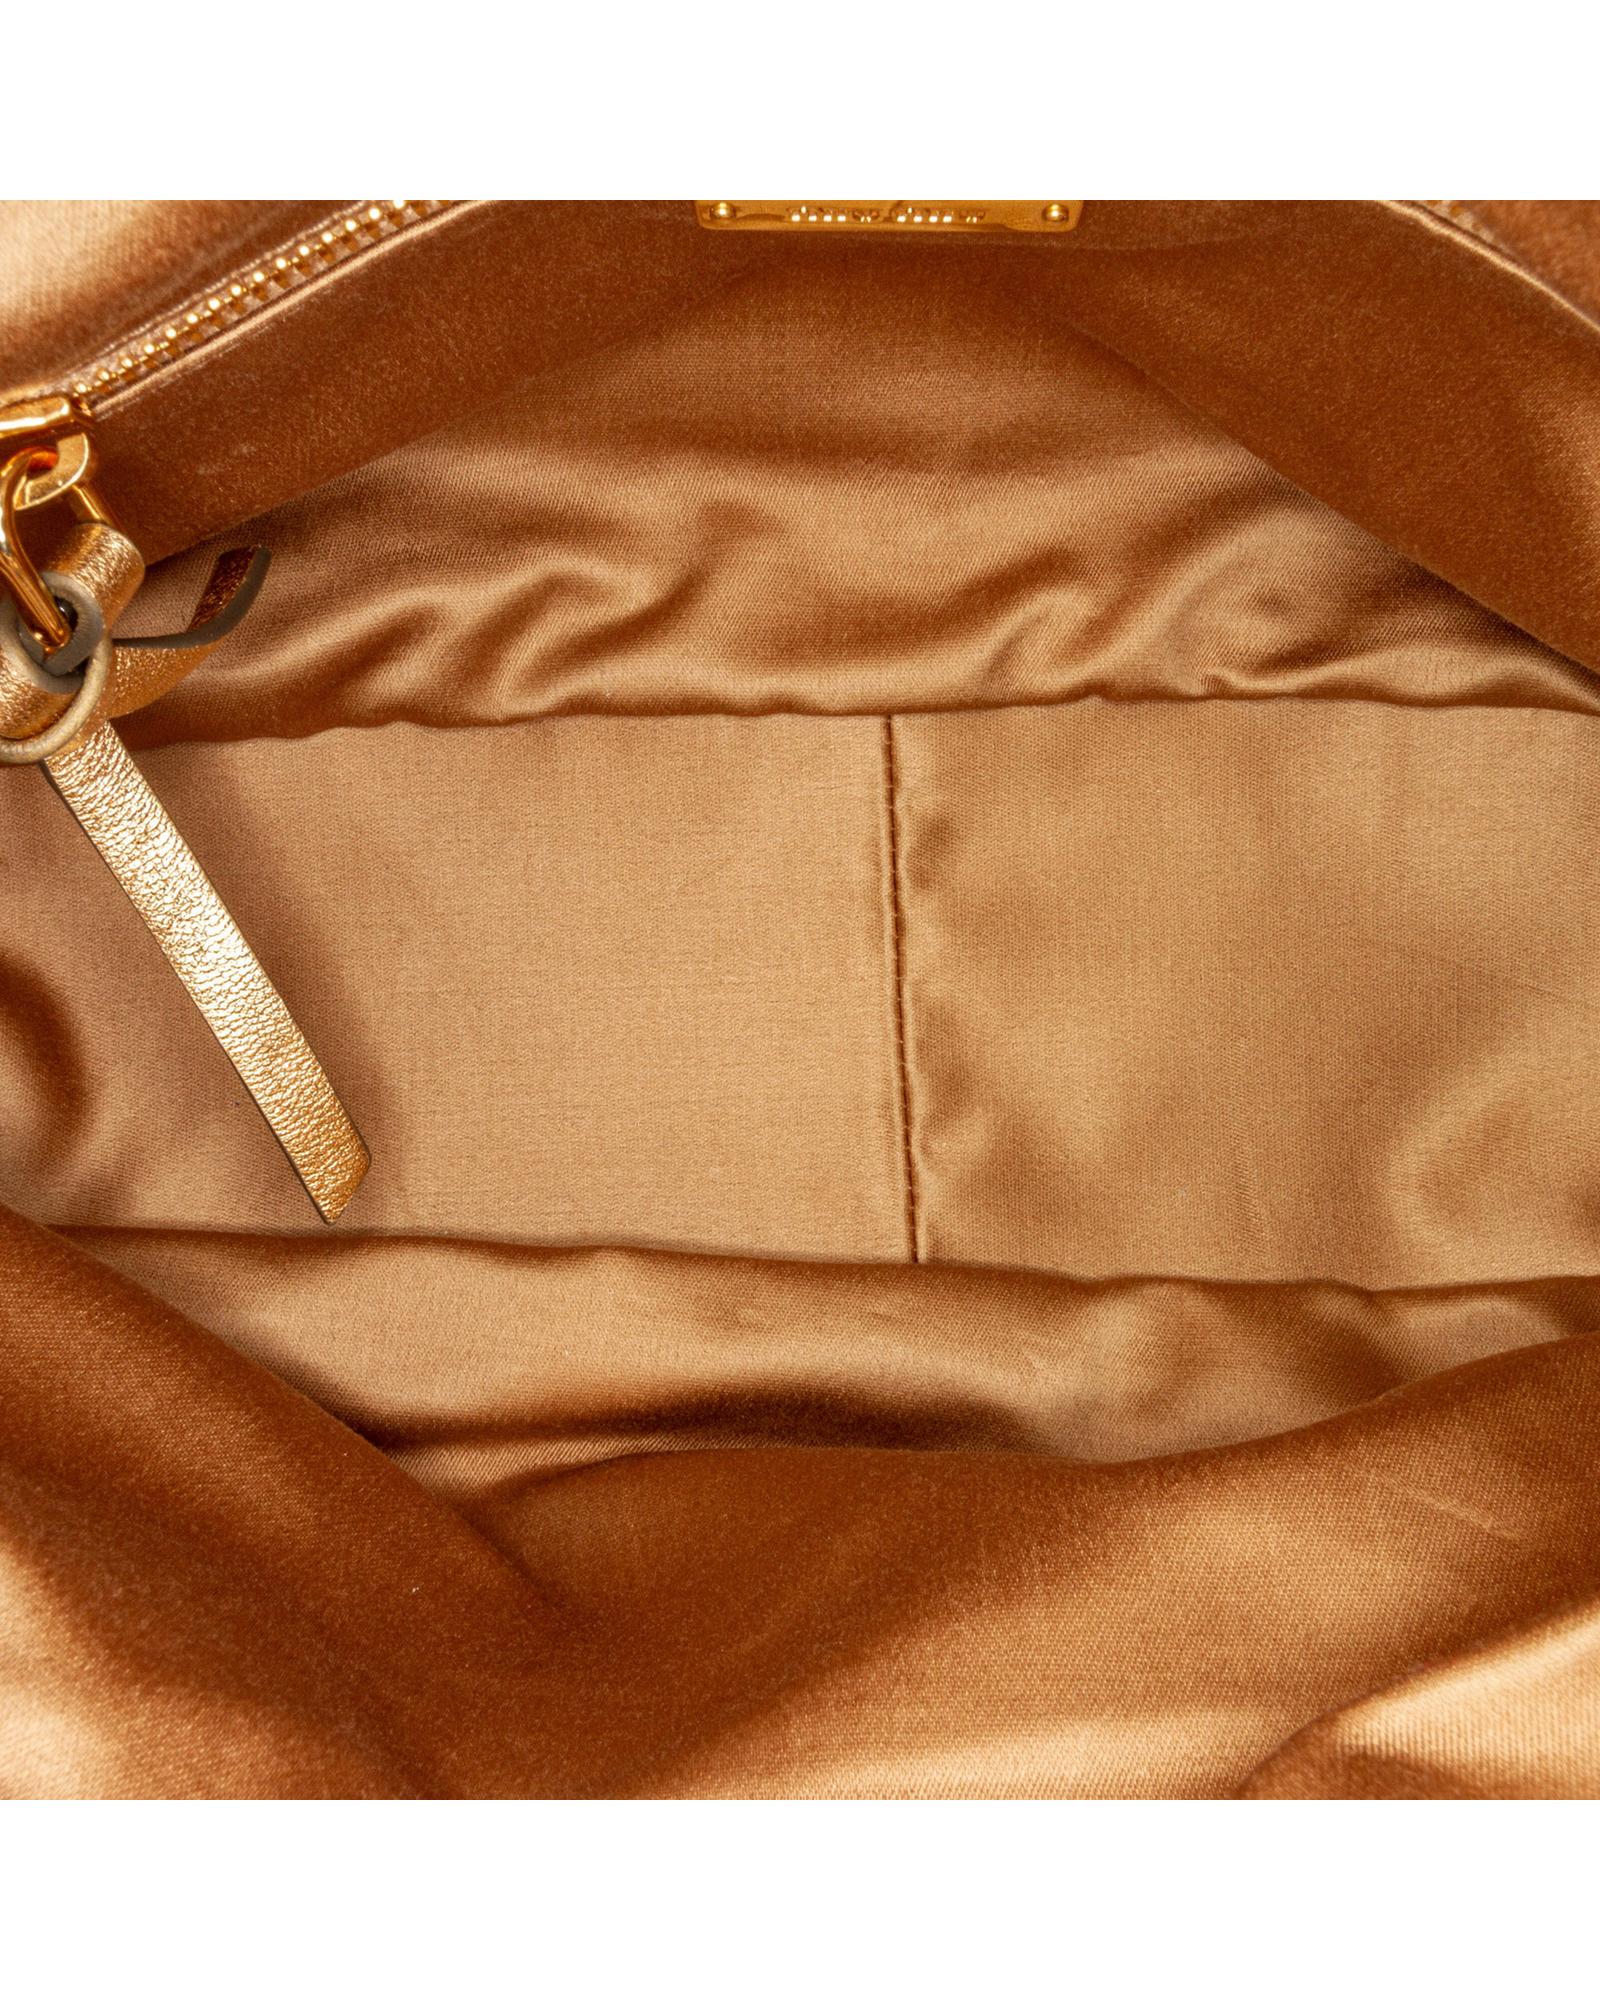 Leather Knot Shoulder Bag with Zip Closure and Interior Pocket